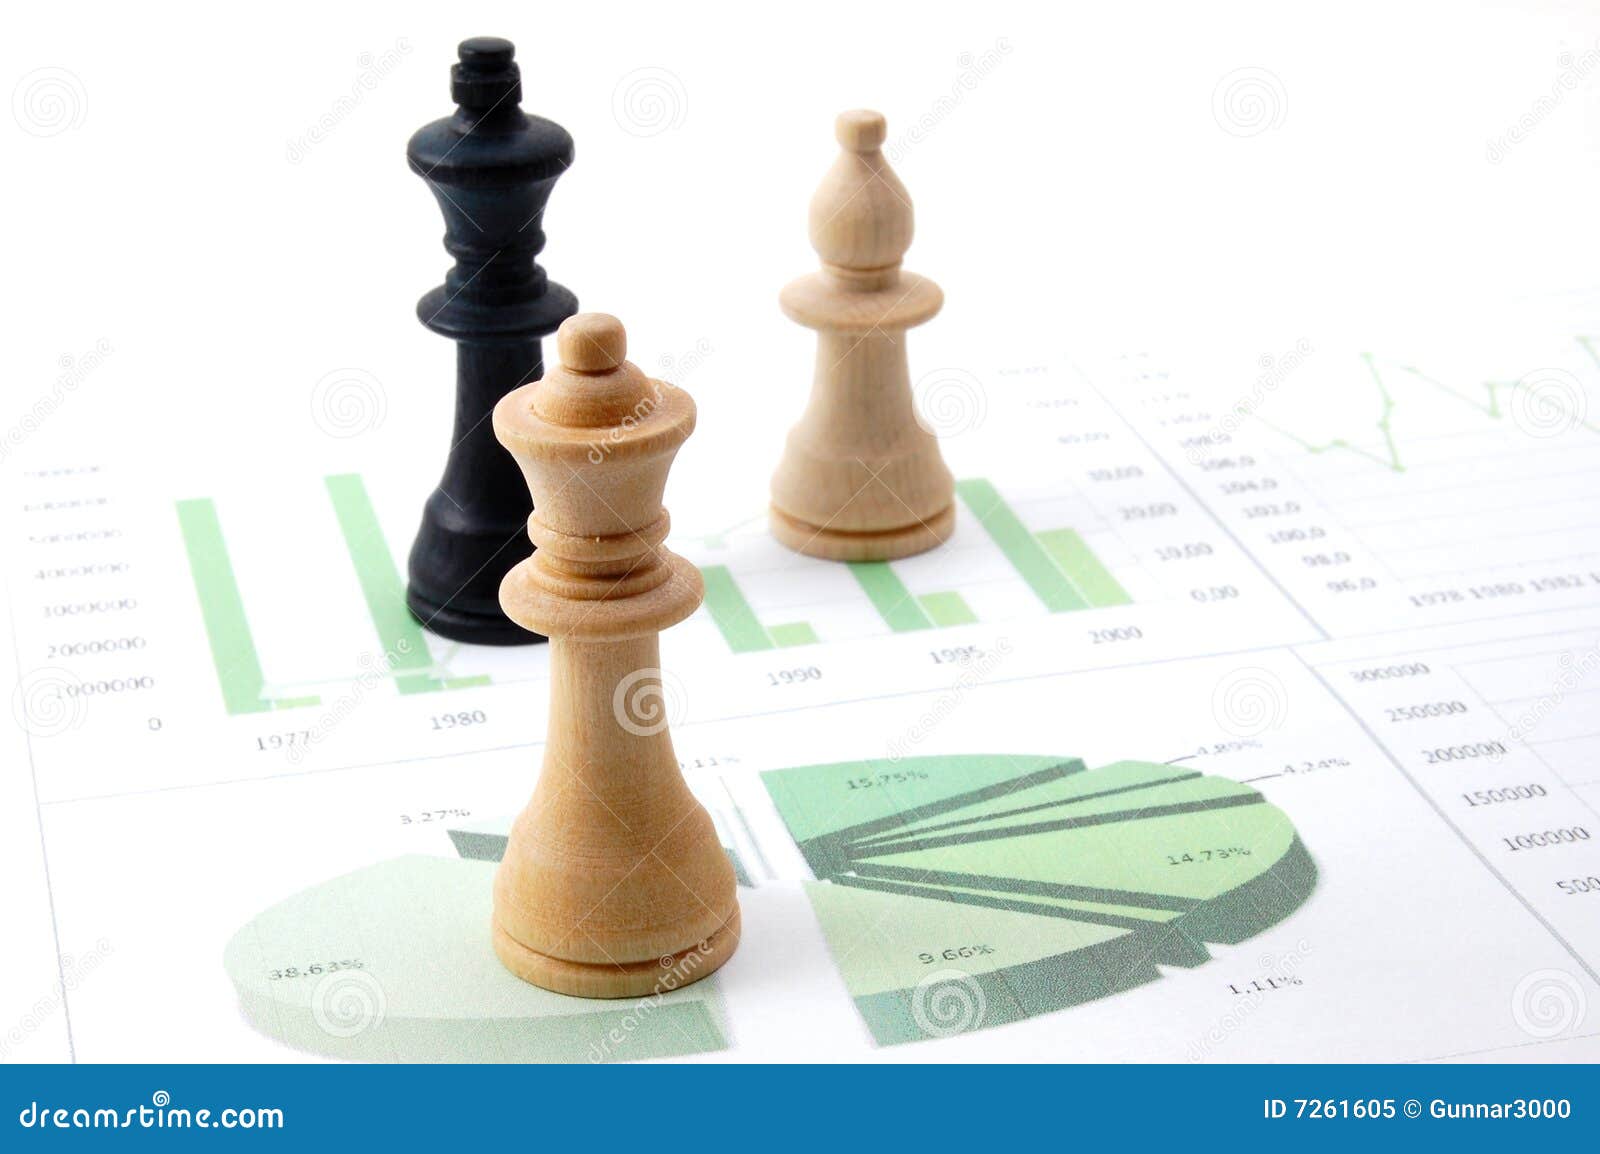 chess man over business chart